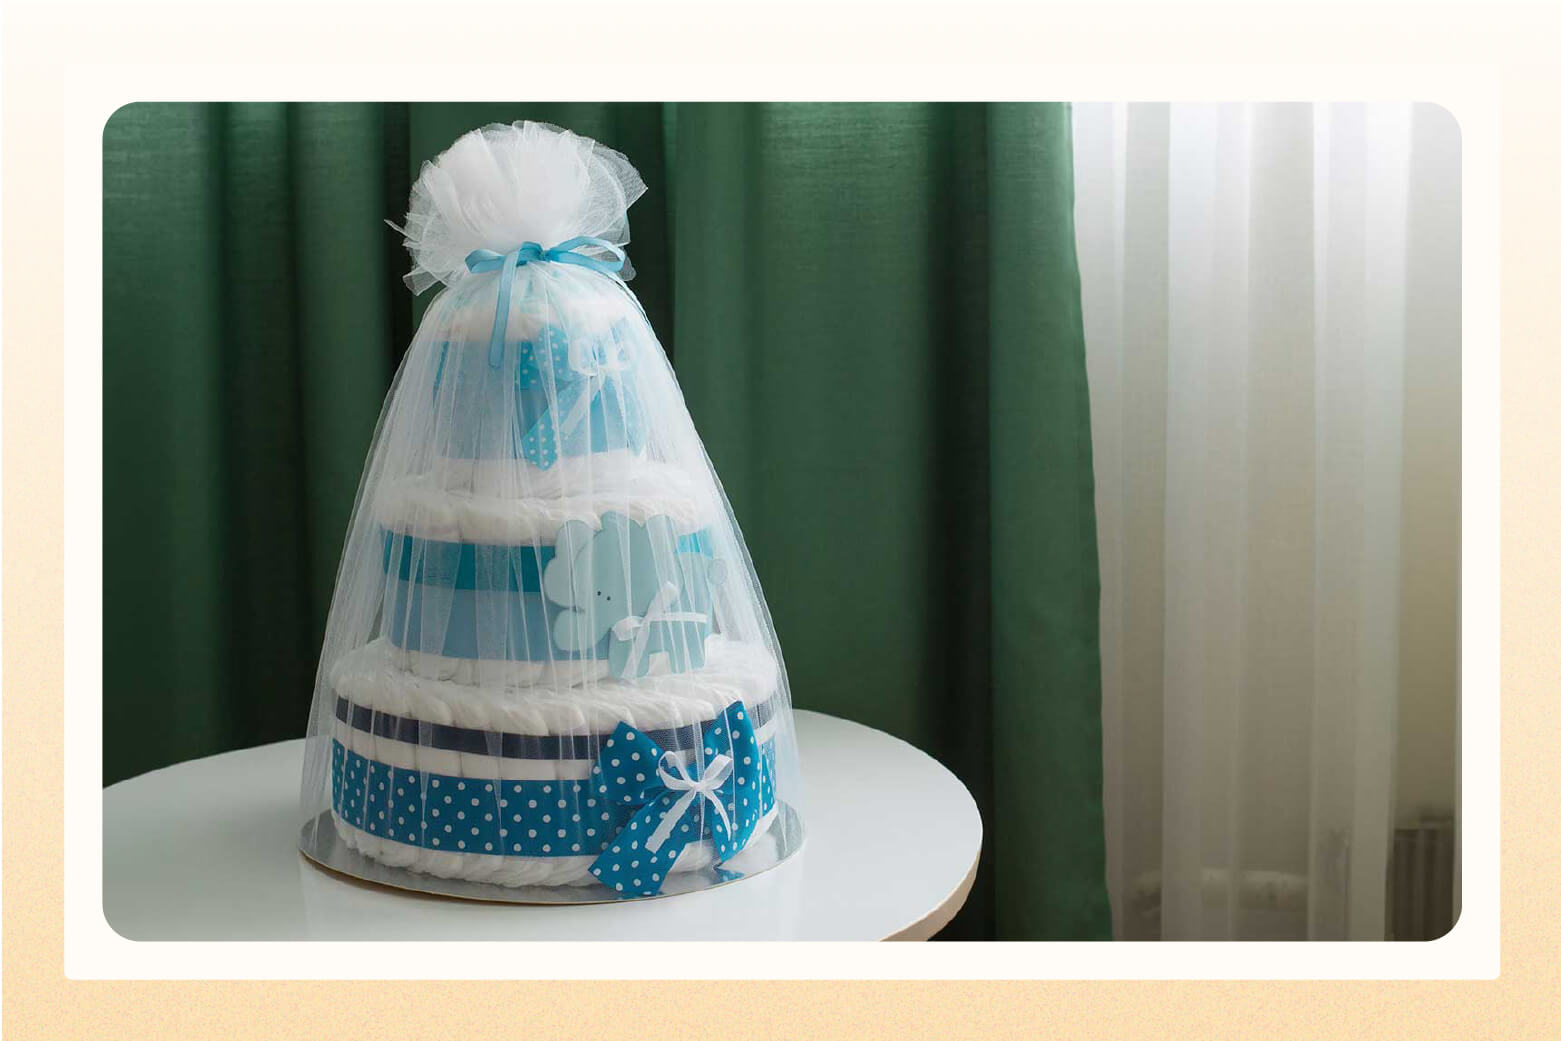 Three-tiered diaper cake wrapped in tulle with blue ribbons as accents